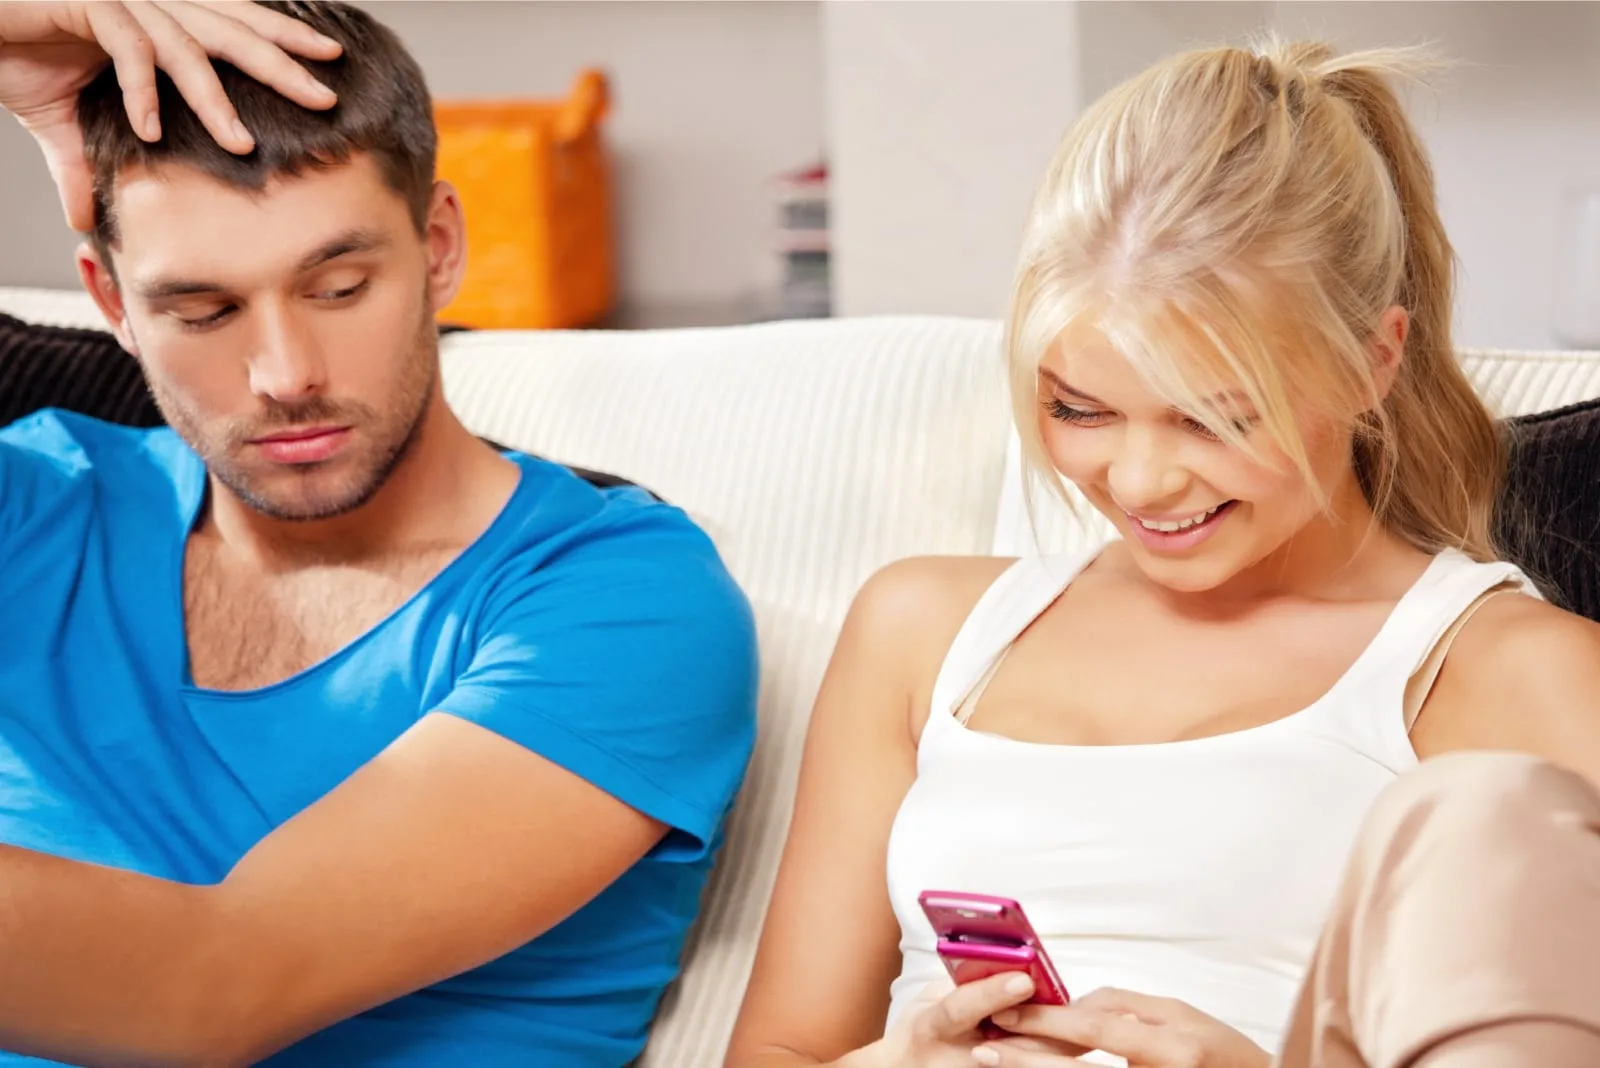 man looking at woman's phone while sitting on sofa